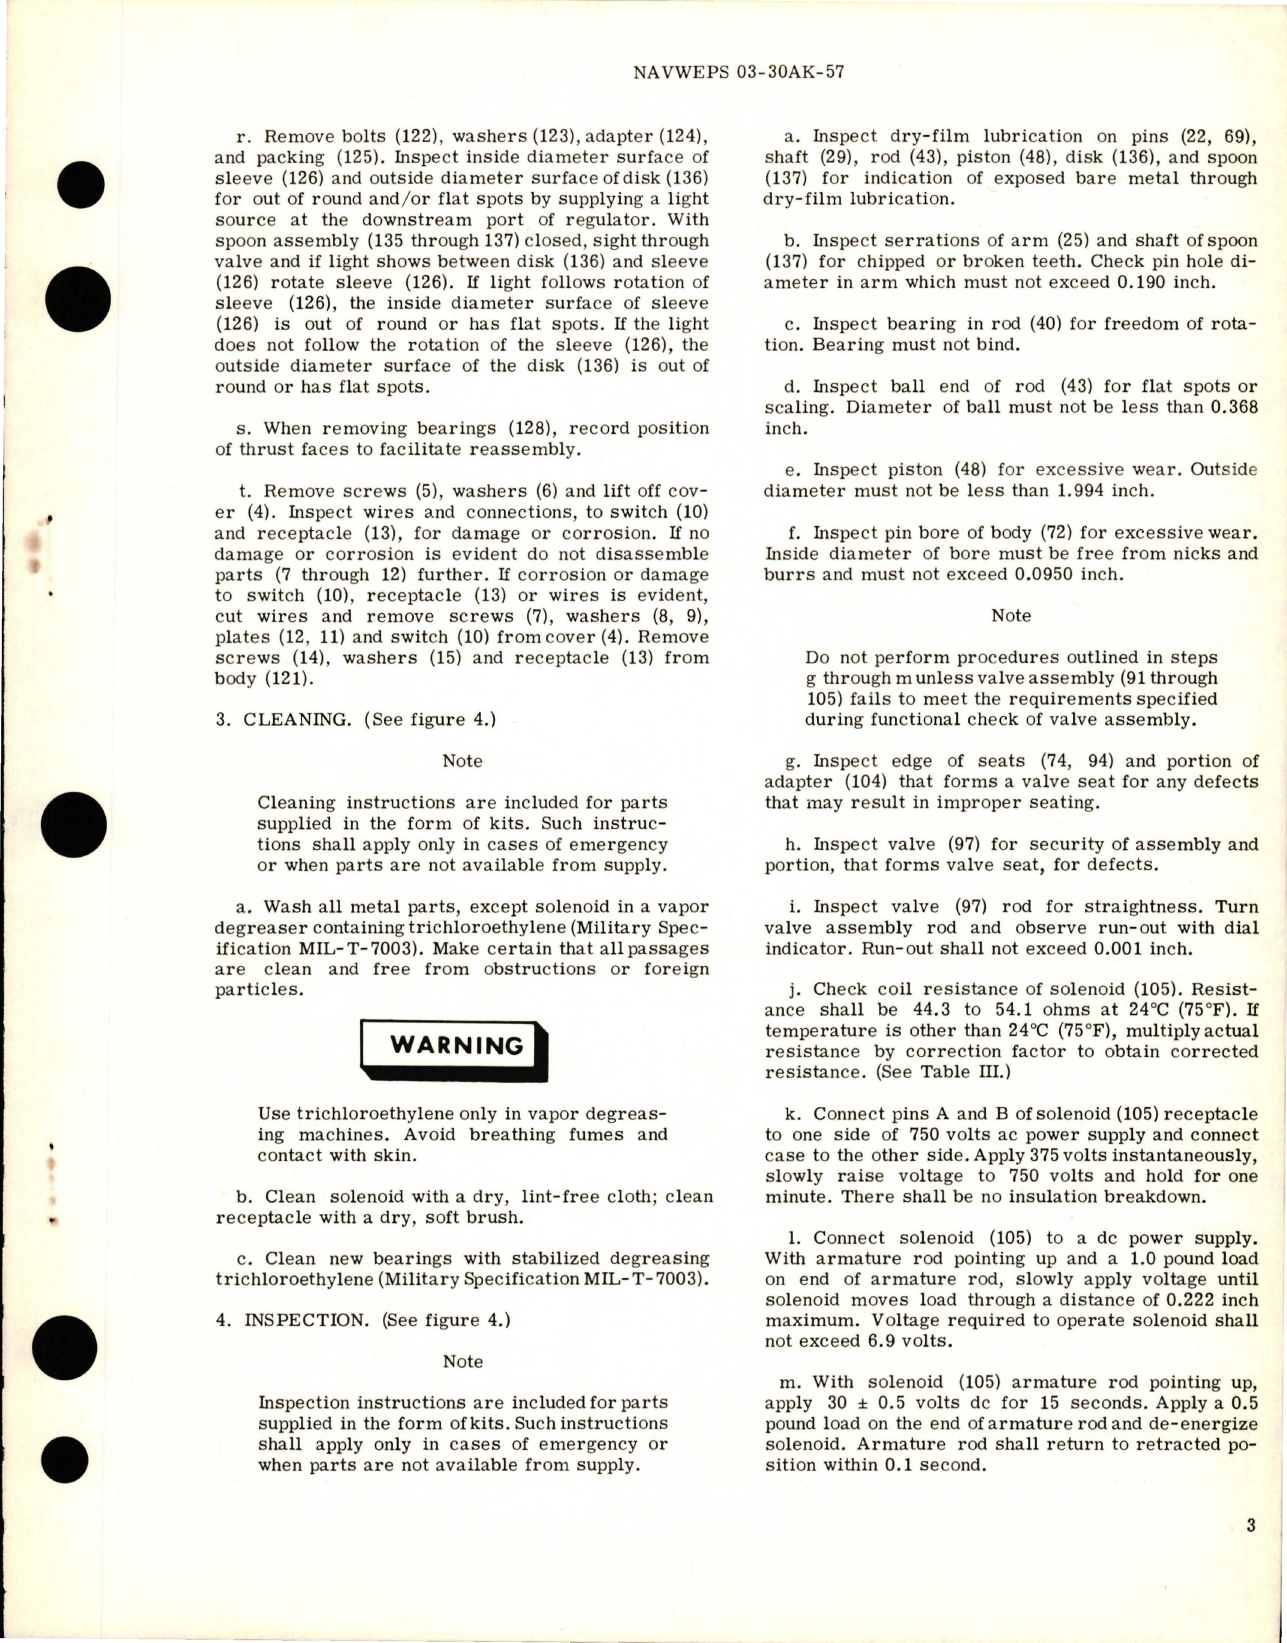 Sample page 5 from AirCorps Library document: Overhaul Instructions with Parts Breakdown for Shutoff Differential Pressure Regulator - Part 108420 - Model APR21-18-1